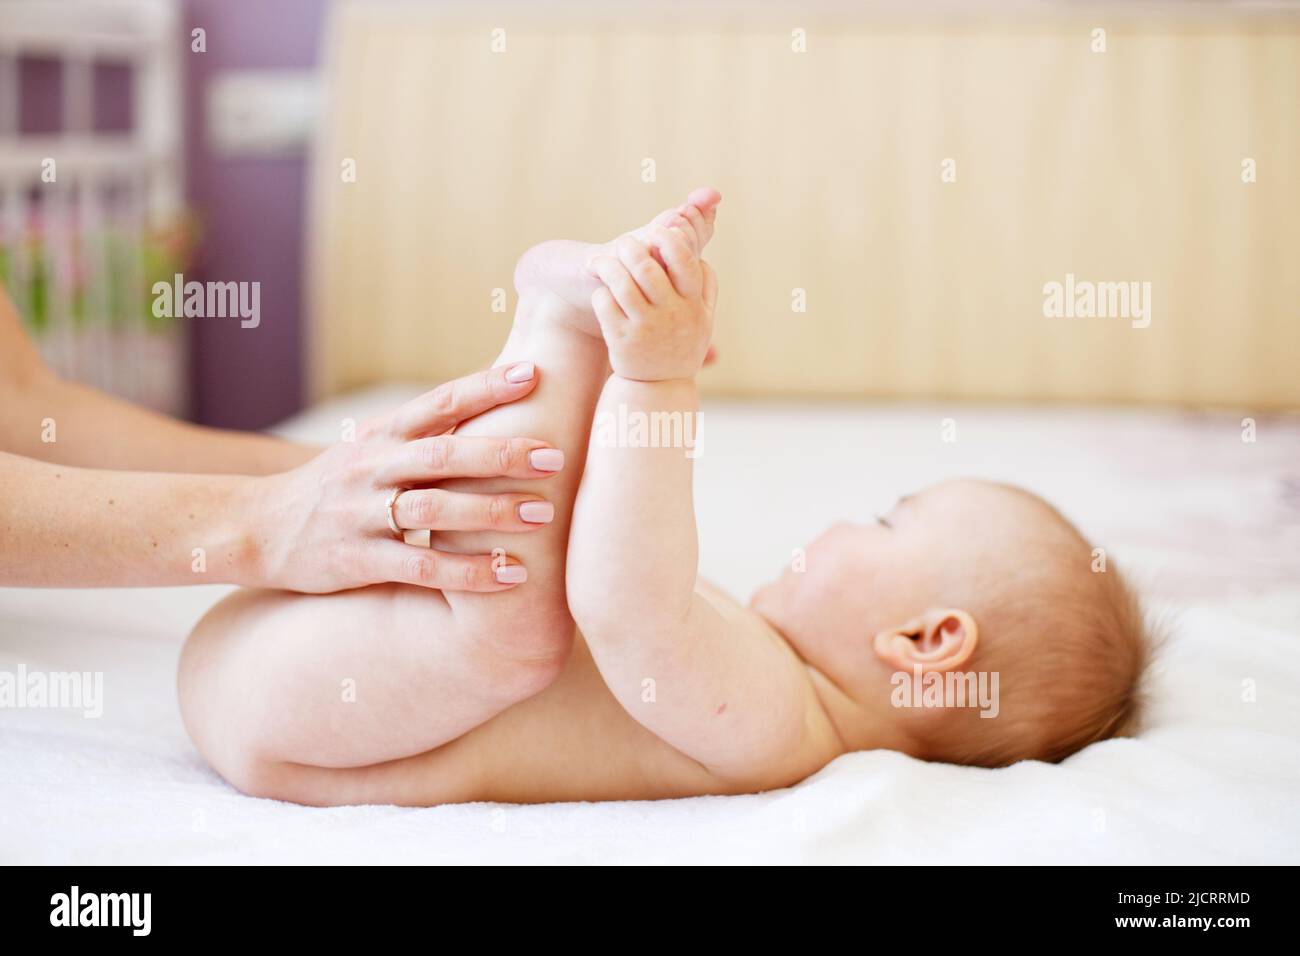 Mom Mom does gymnastics for a child. Mother massaging baby in a bed at home. Mother and baby. Happy family. Mom's love and tenderness. Stock Photo